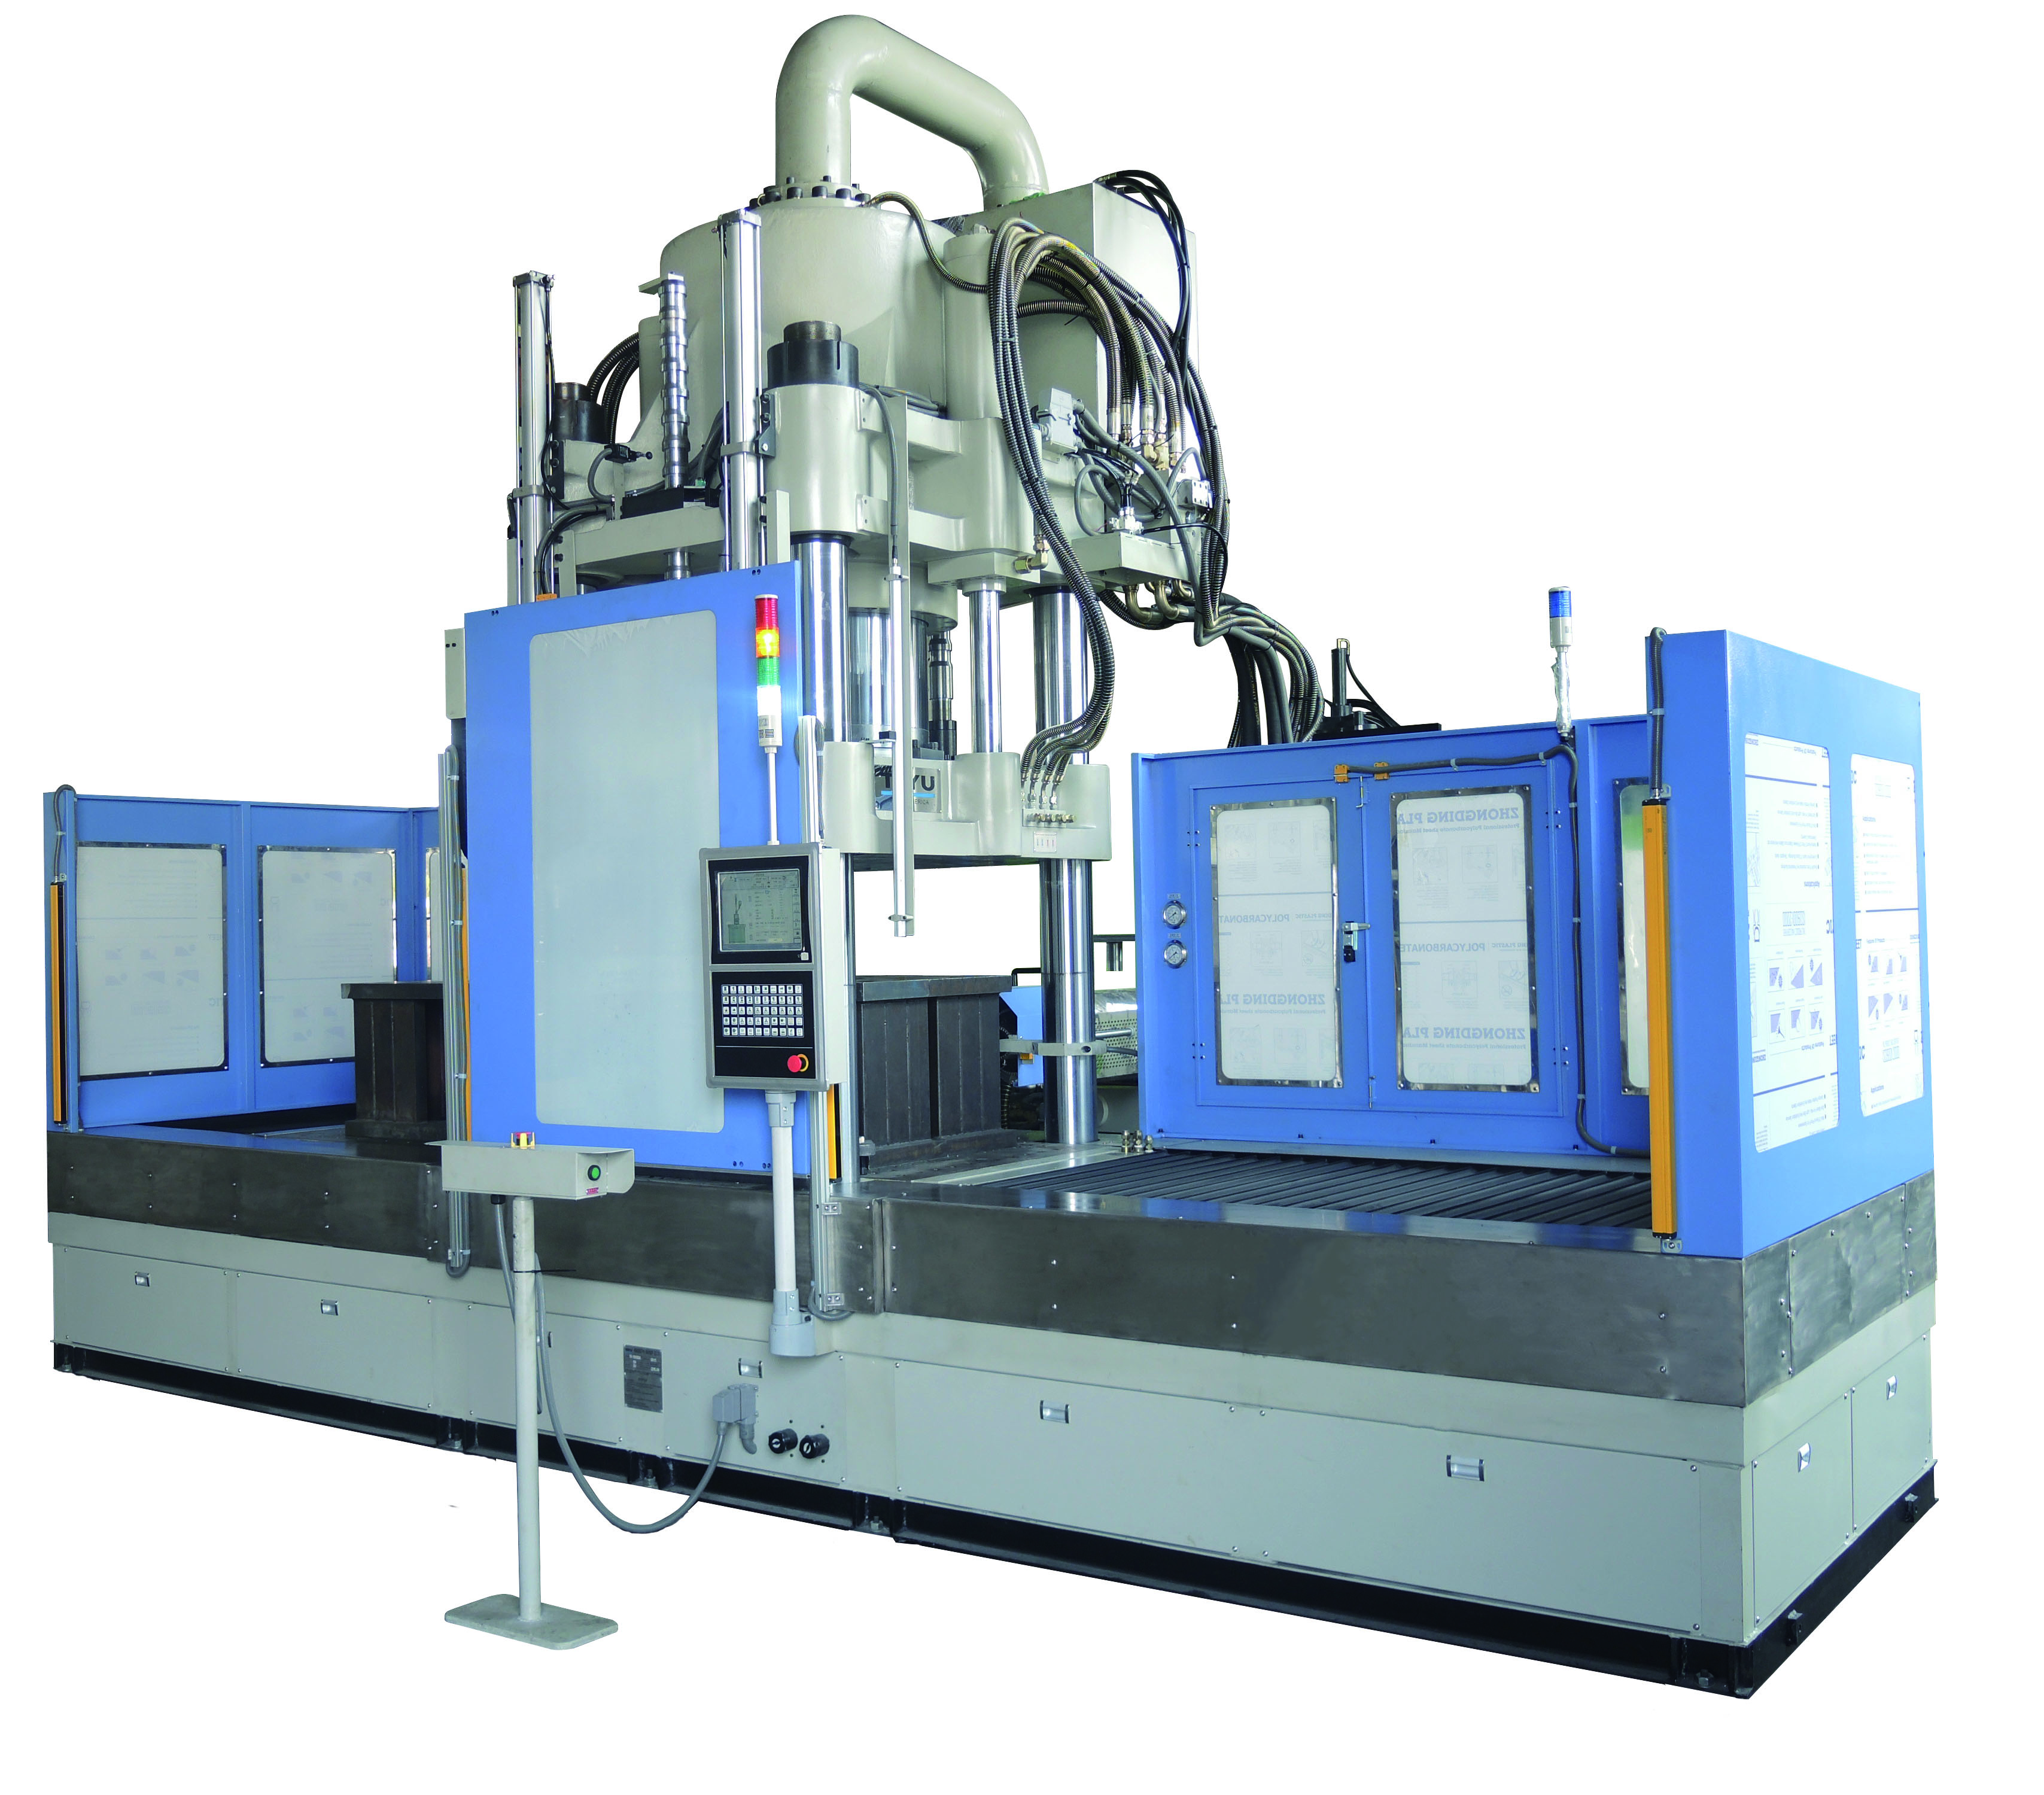 TK-5000DS vertical injection molding machine